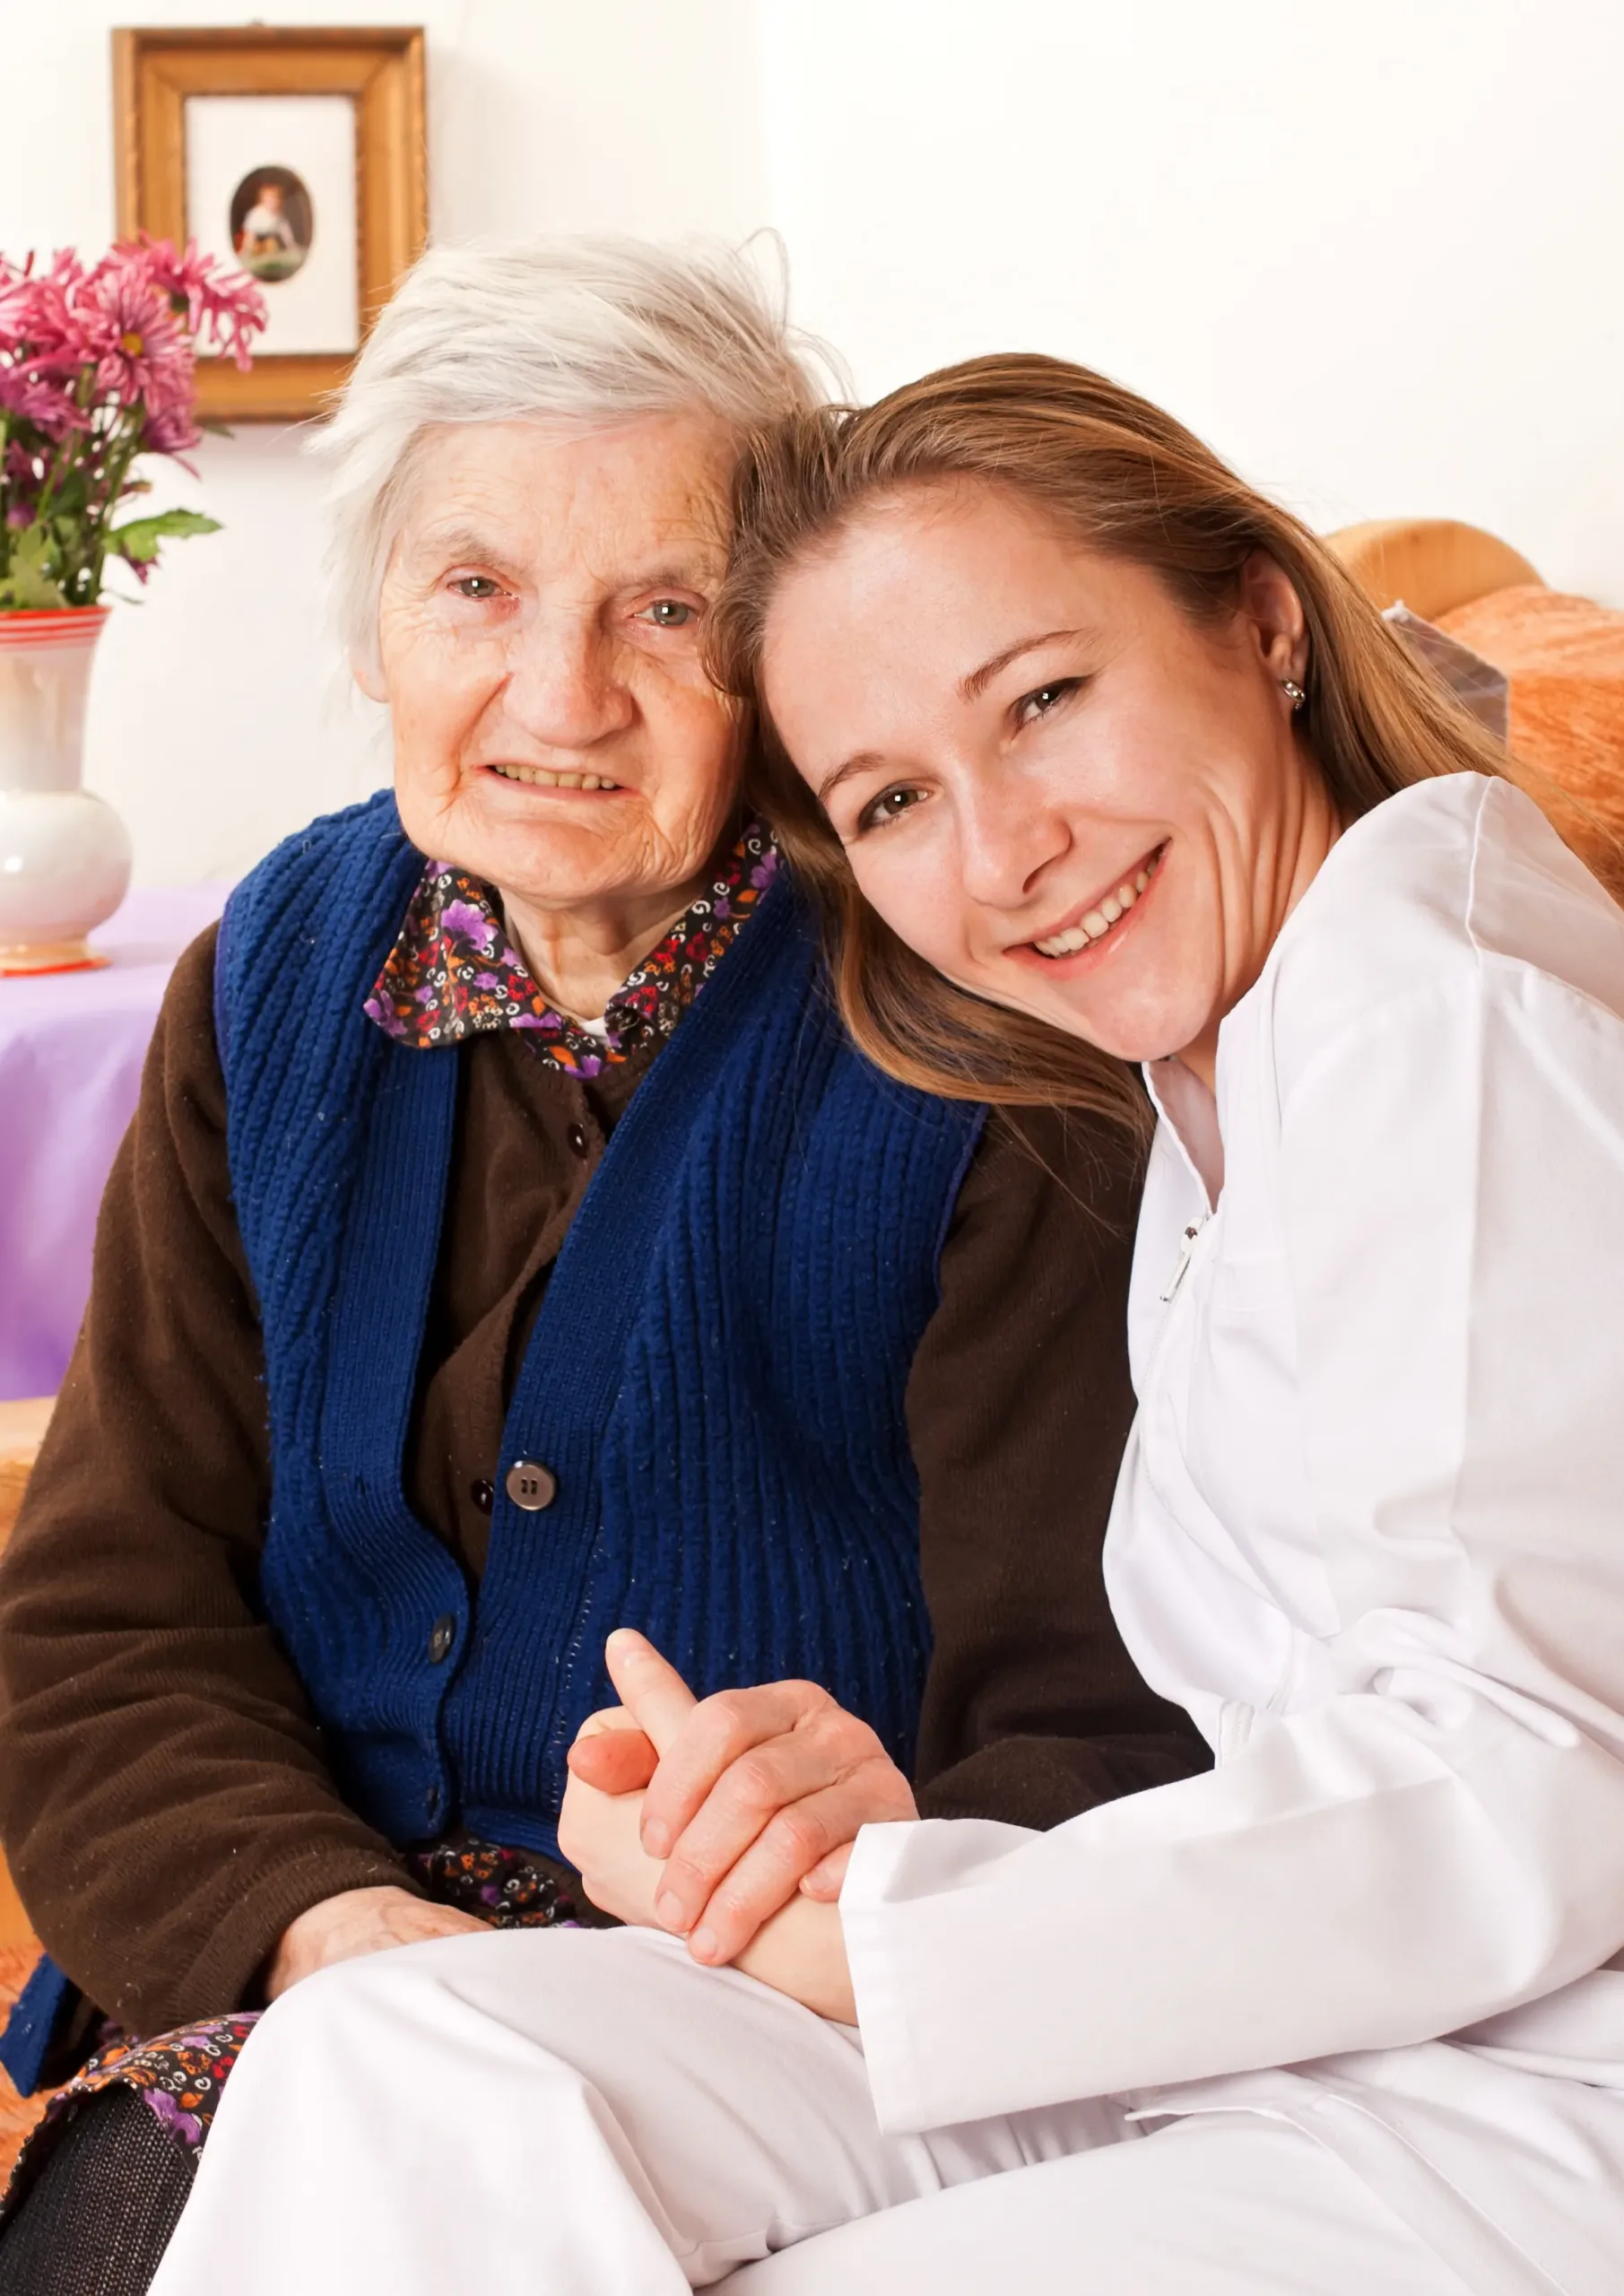 Palliative and Hospice Care in Cleburne Texas - Ridgeview Village